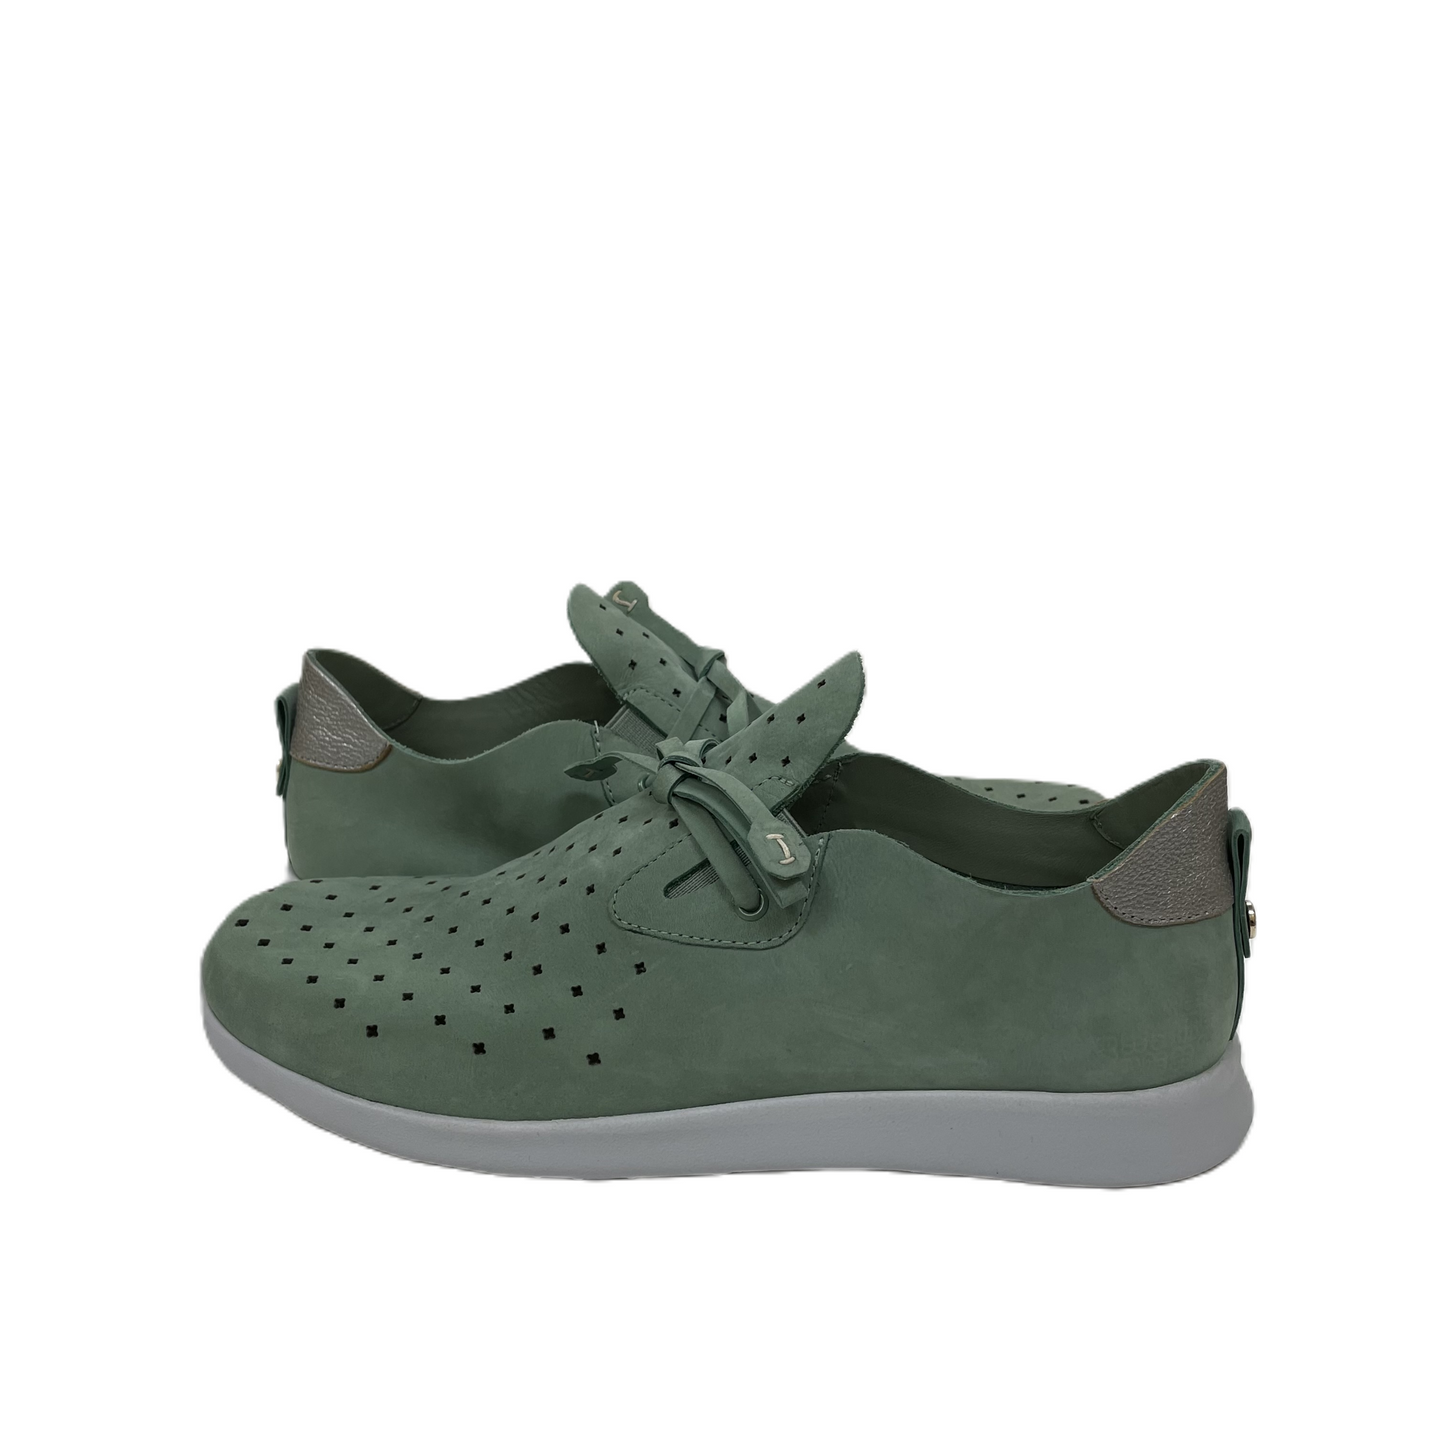 Green Shoes Athletic By Nurture, Size: 7.5